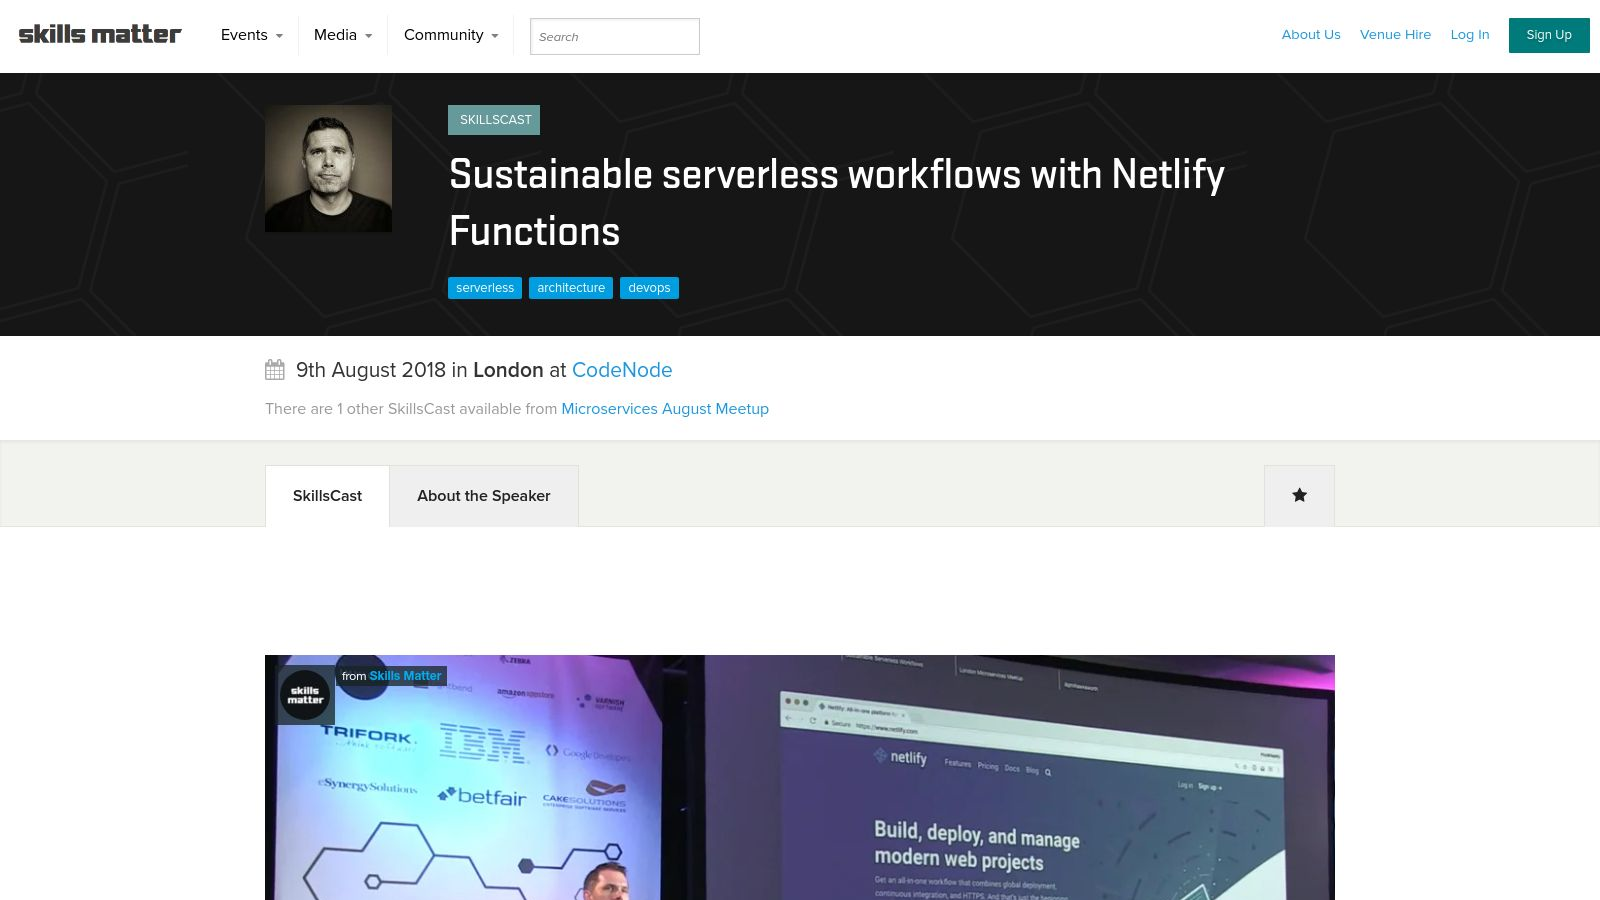 Sustainable serverless workflows with Netlify Functions